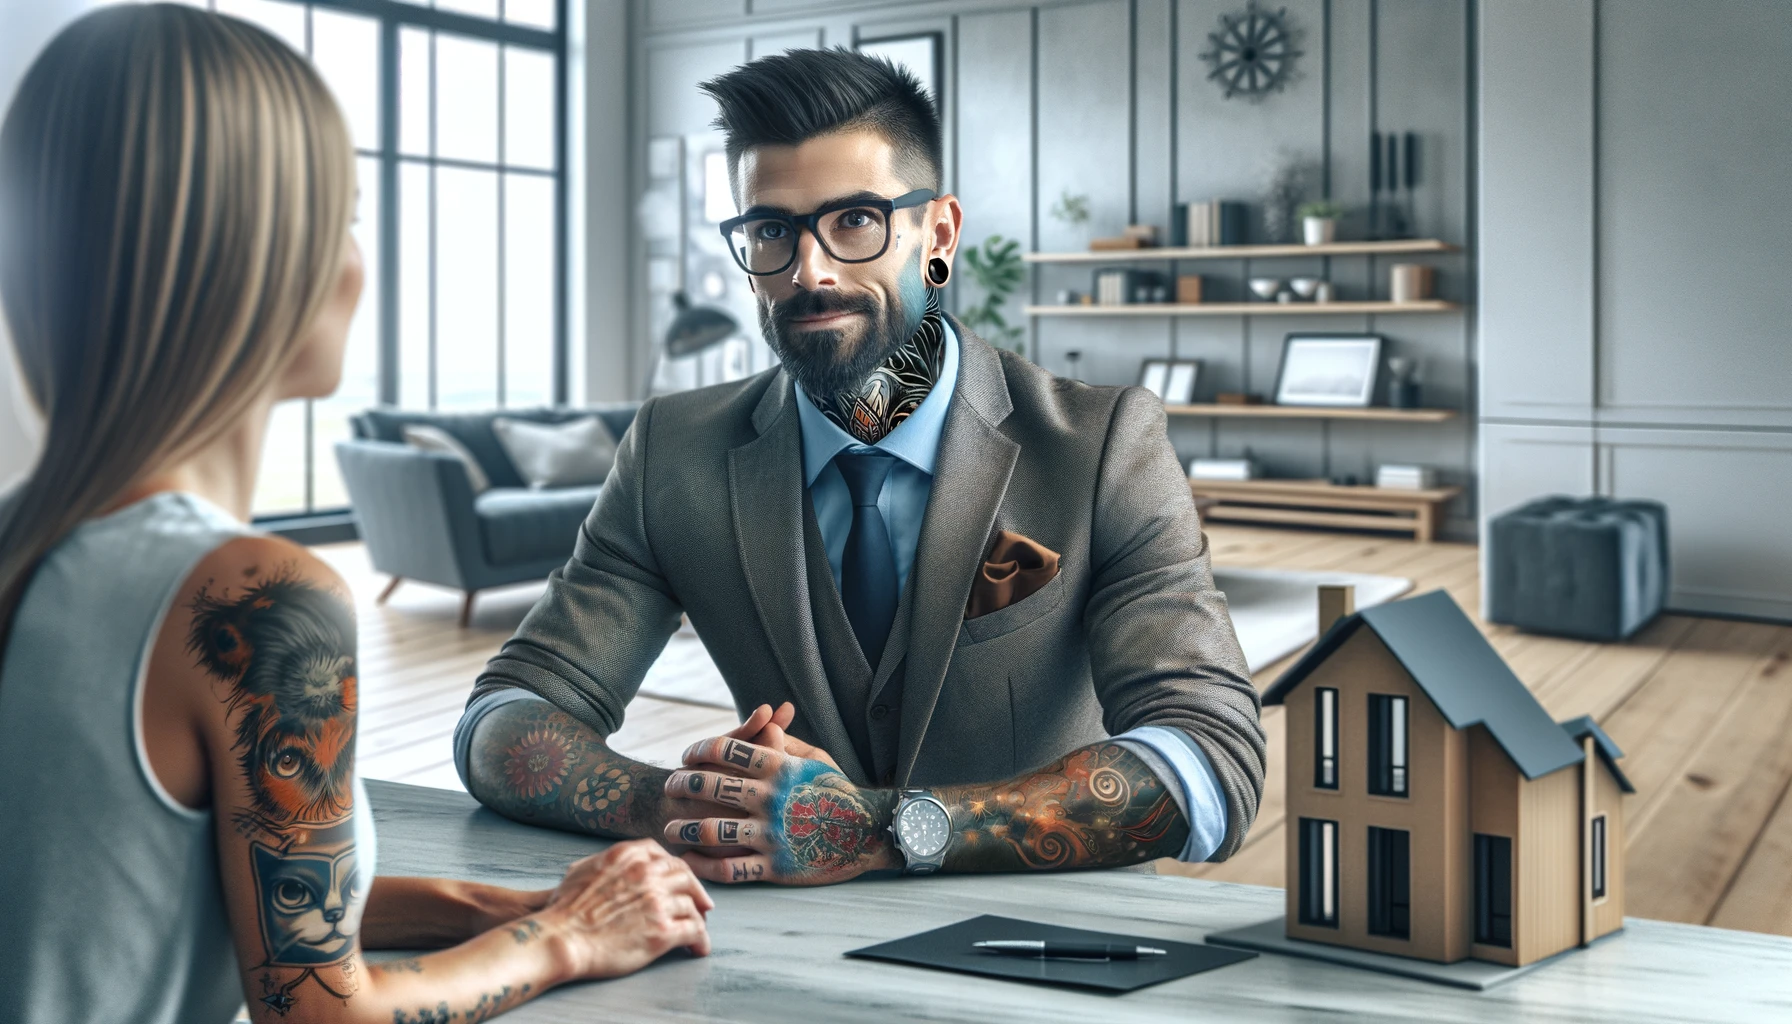 Can You Have Tattoos as a Real Estate Agent?